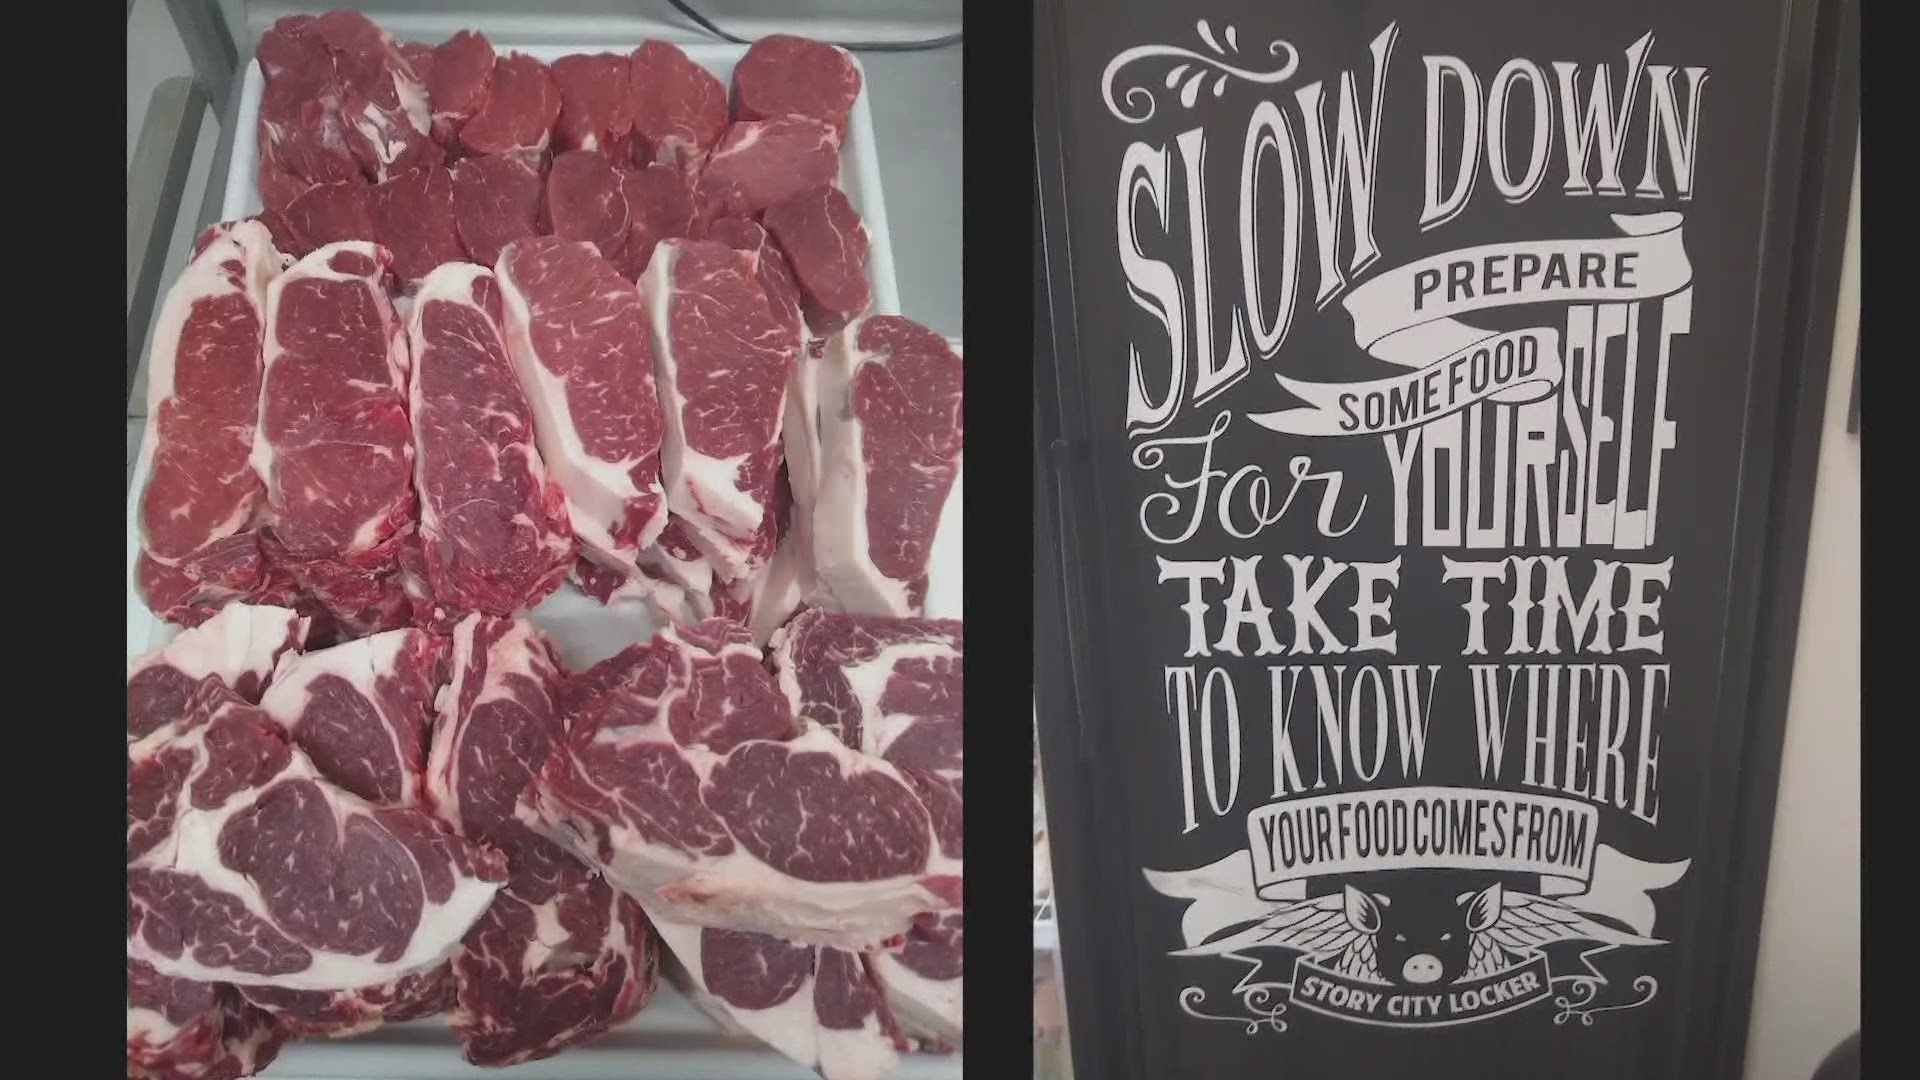 New program aims to help local meat producers in Iowa